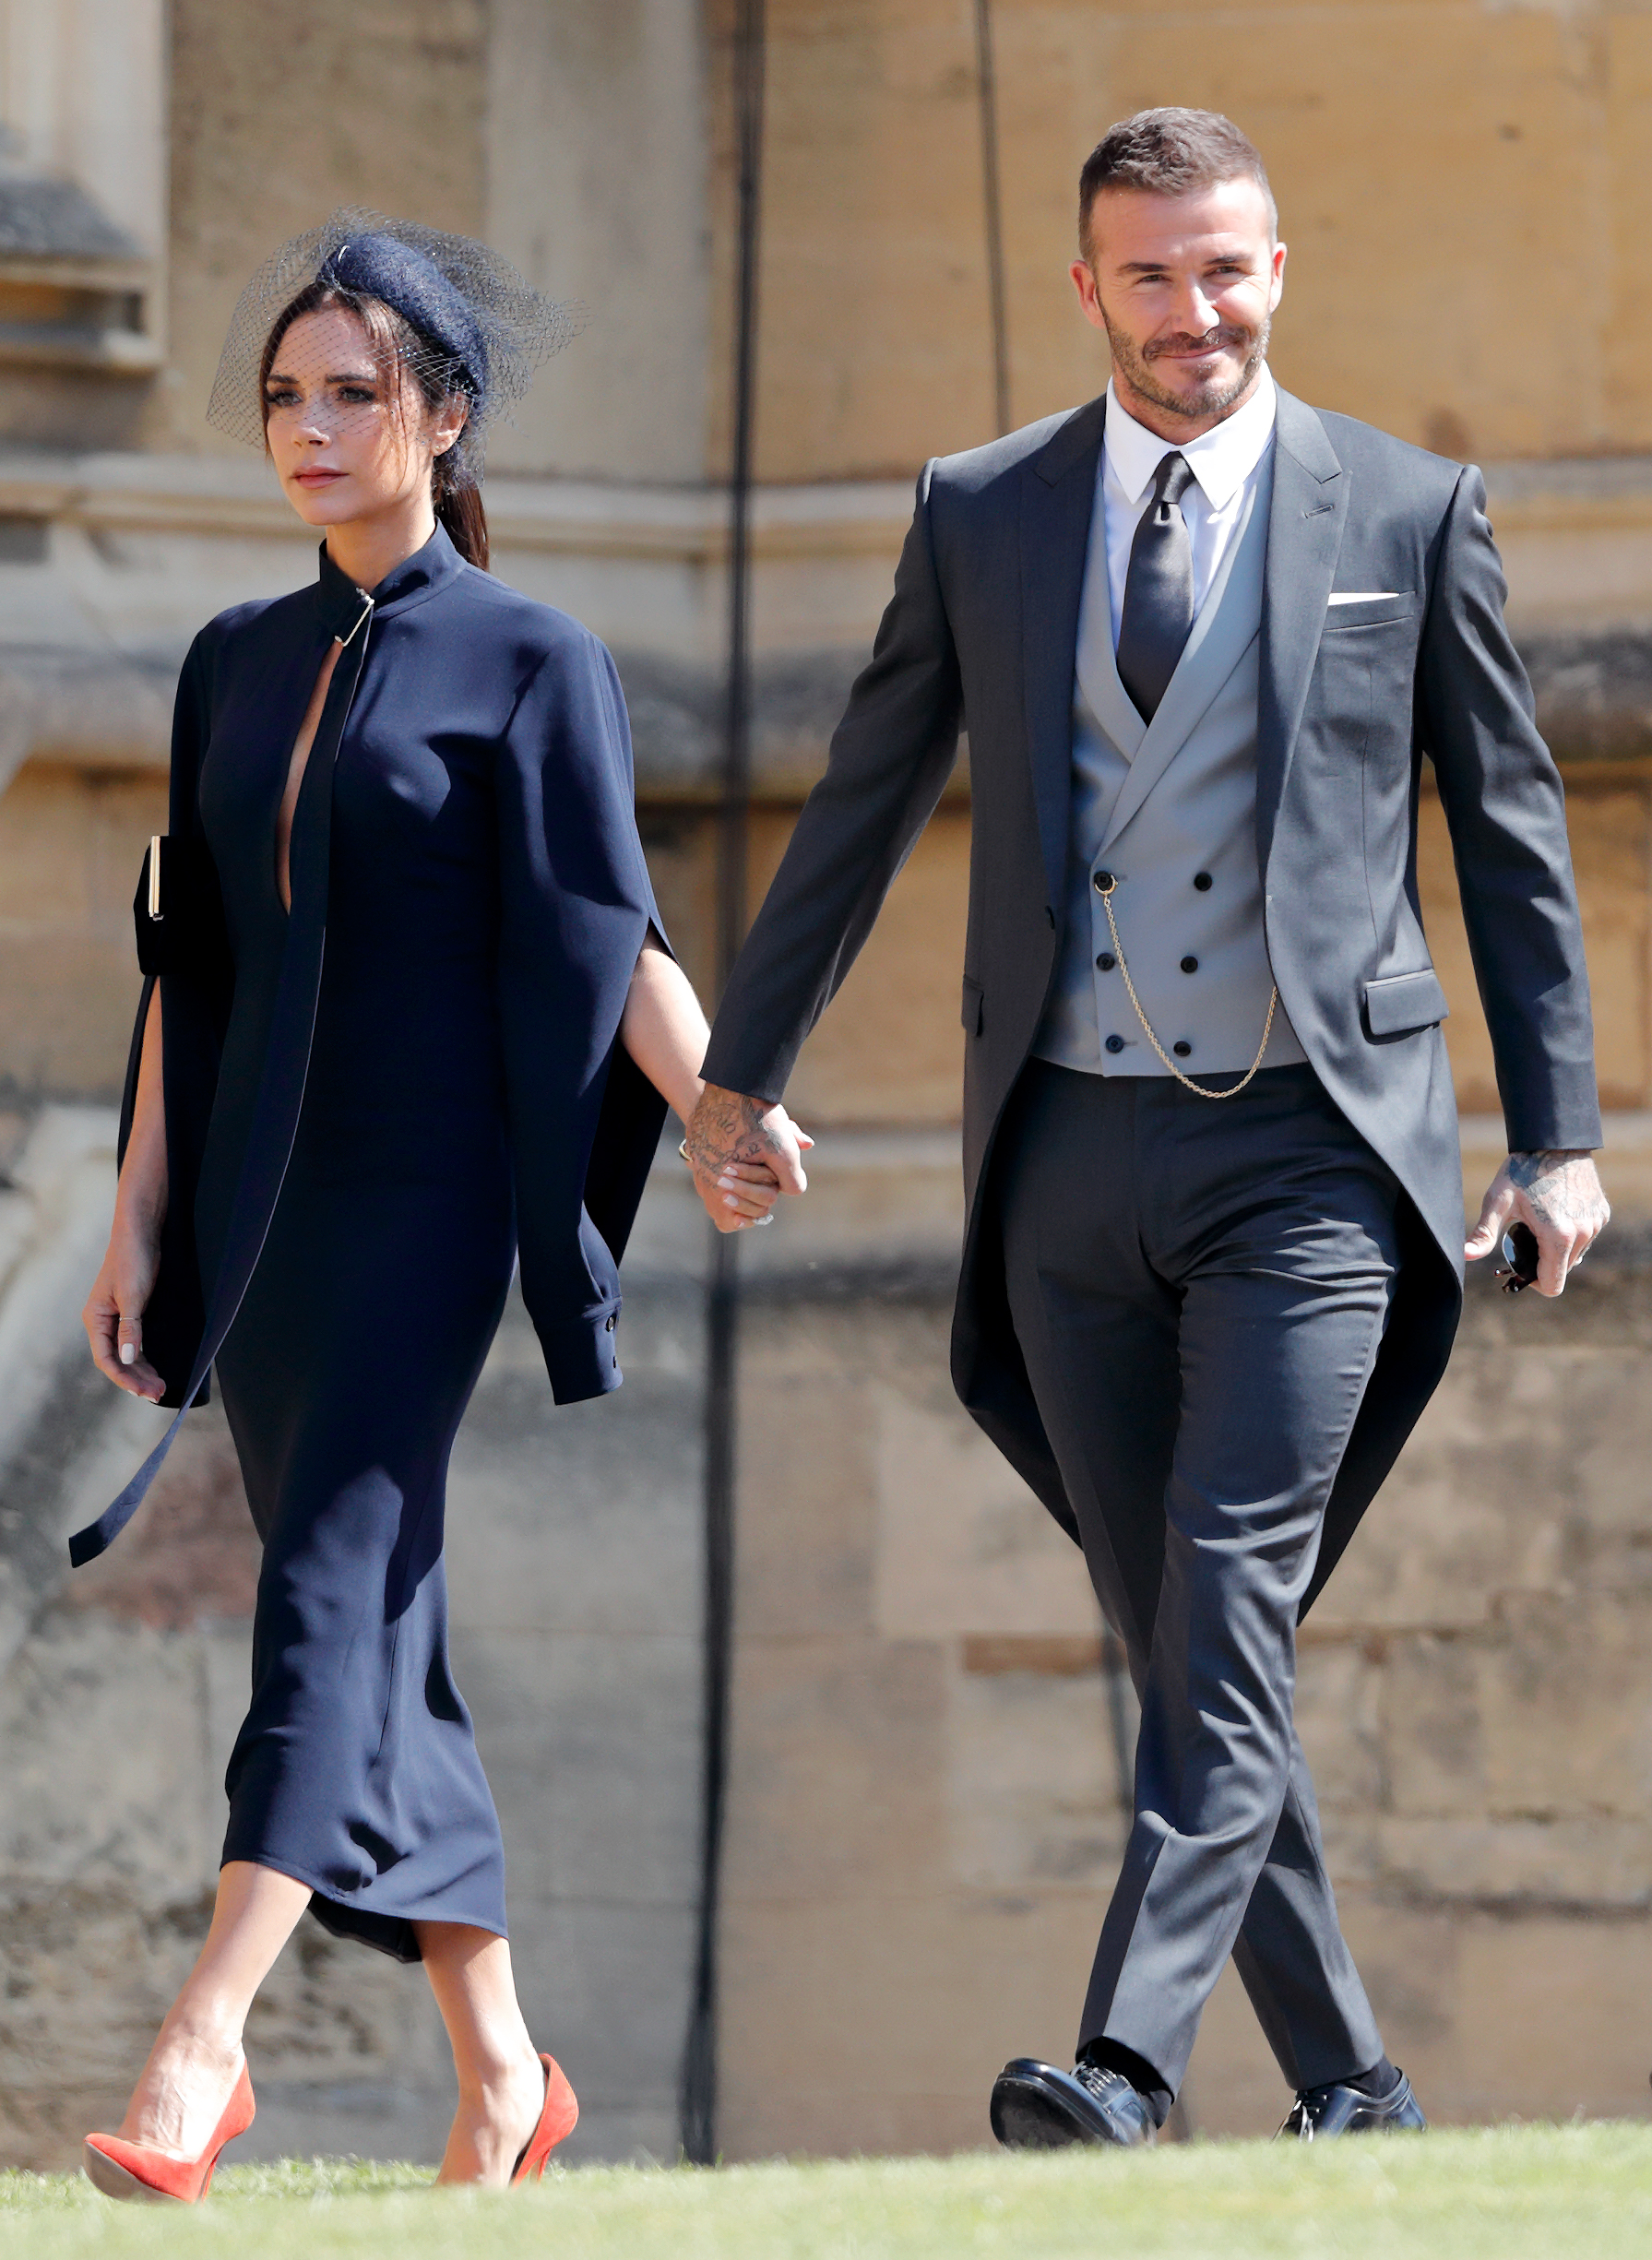 Victoria Beckham and David Beckham attend the wedding of Prince Harry to Meghan Markle at St George's Chapel, Windsor Castle, on May 19, 2018, in Windsor, England. | Source: Getty Images